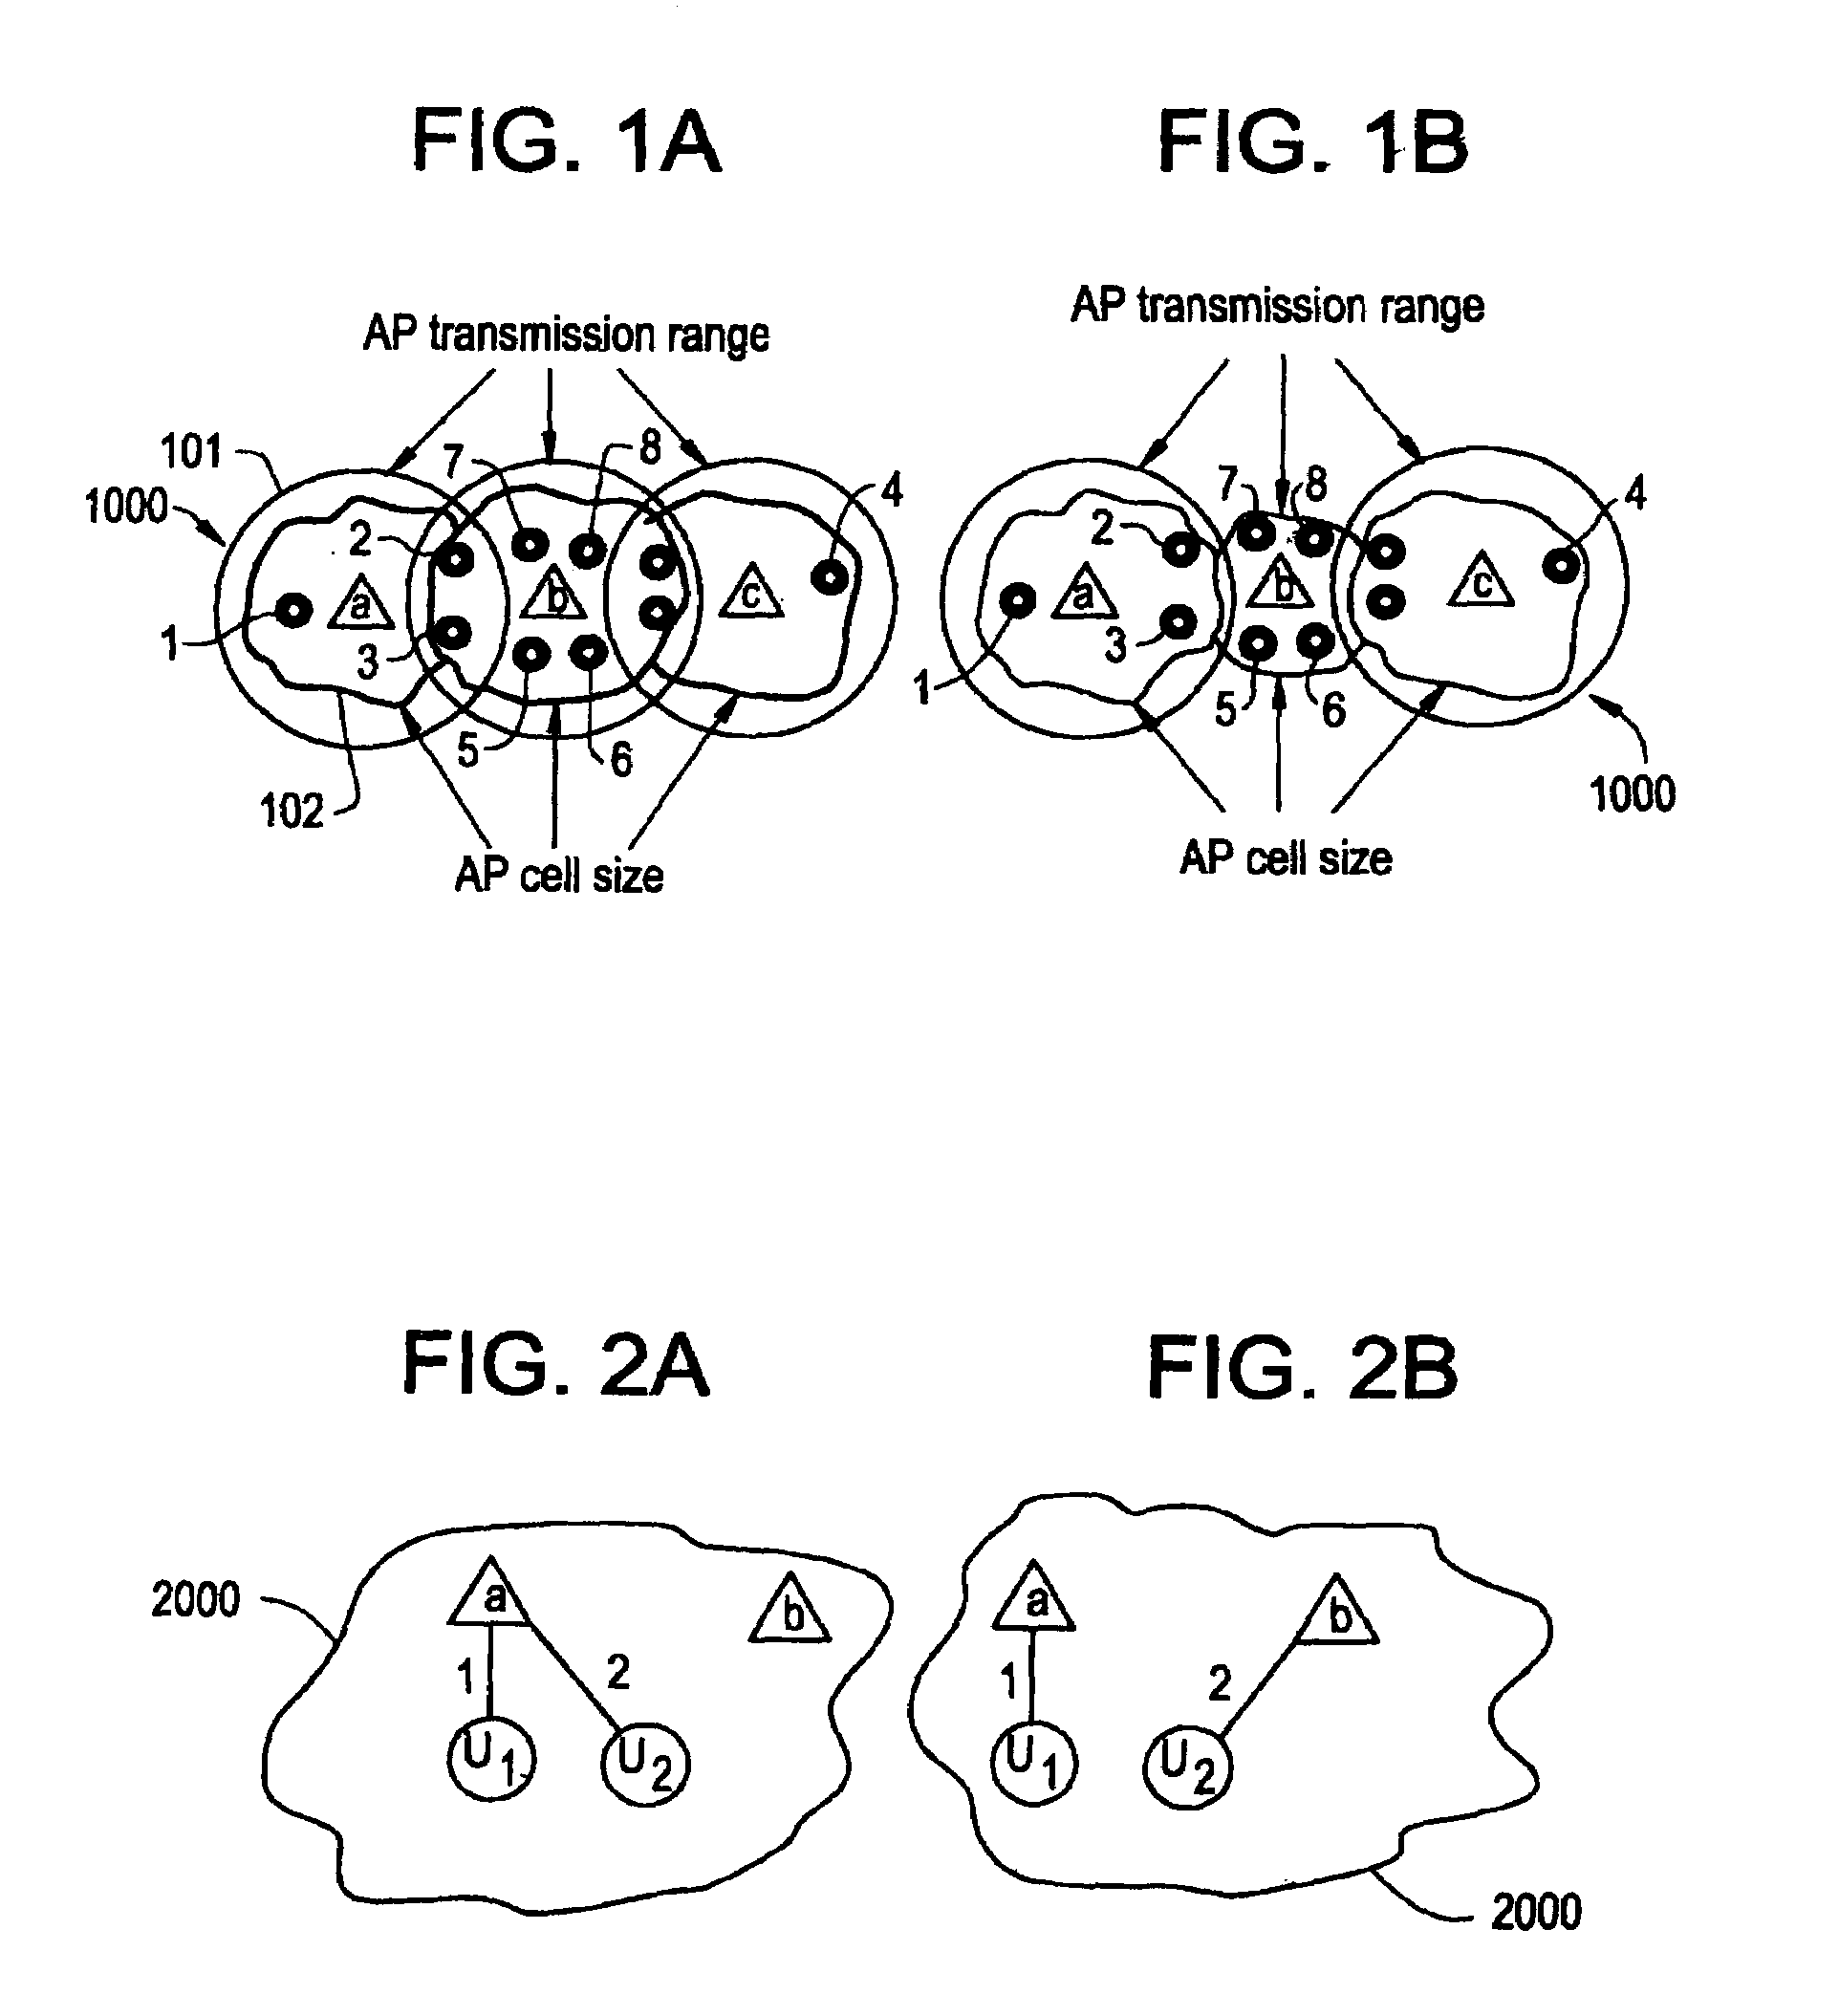 Methods and devices for balancing the load on access points in wireless local area networks